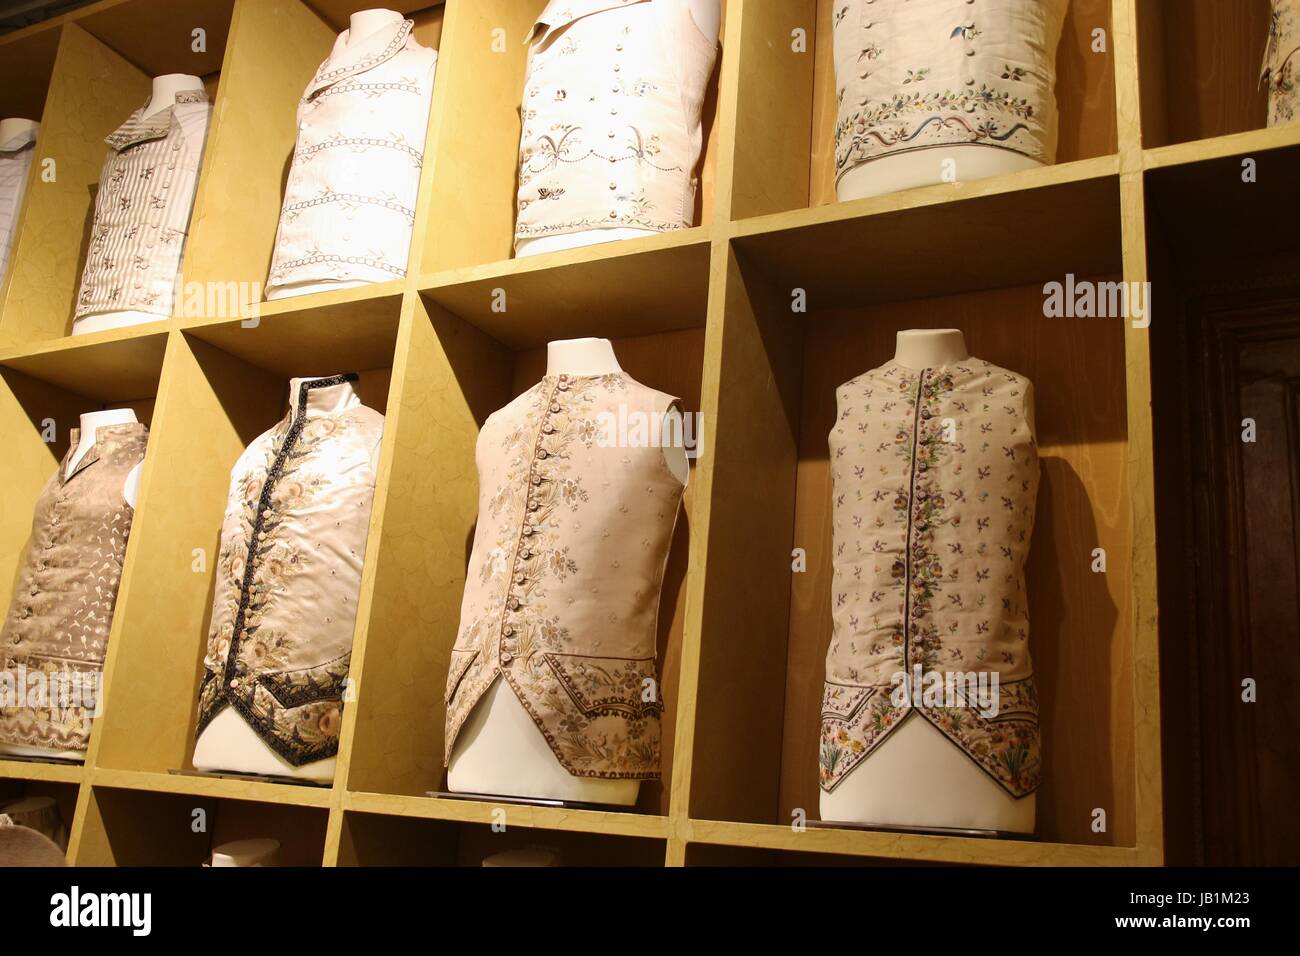 Fine waistcoats for aristocrats in Venice between 1700 and 1750. Exhibited in the Mocenigo Palace Museum in Venice, Italy, Europe. Stock Photo